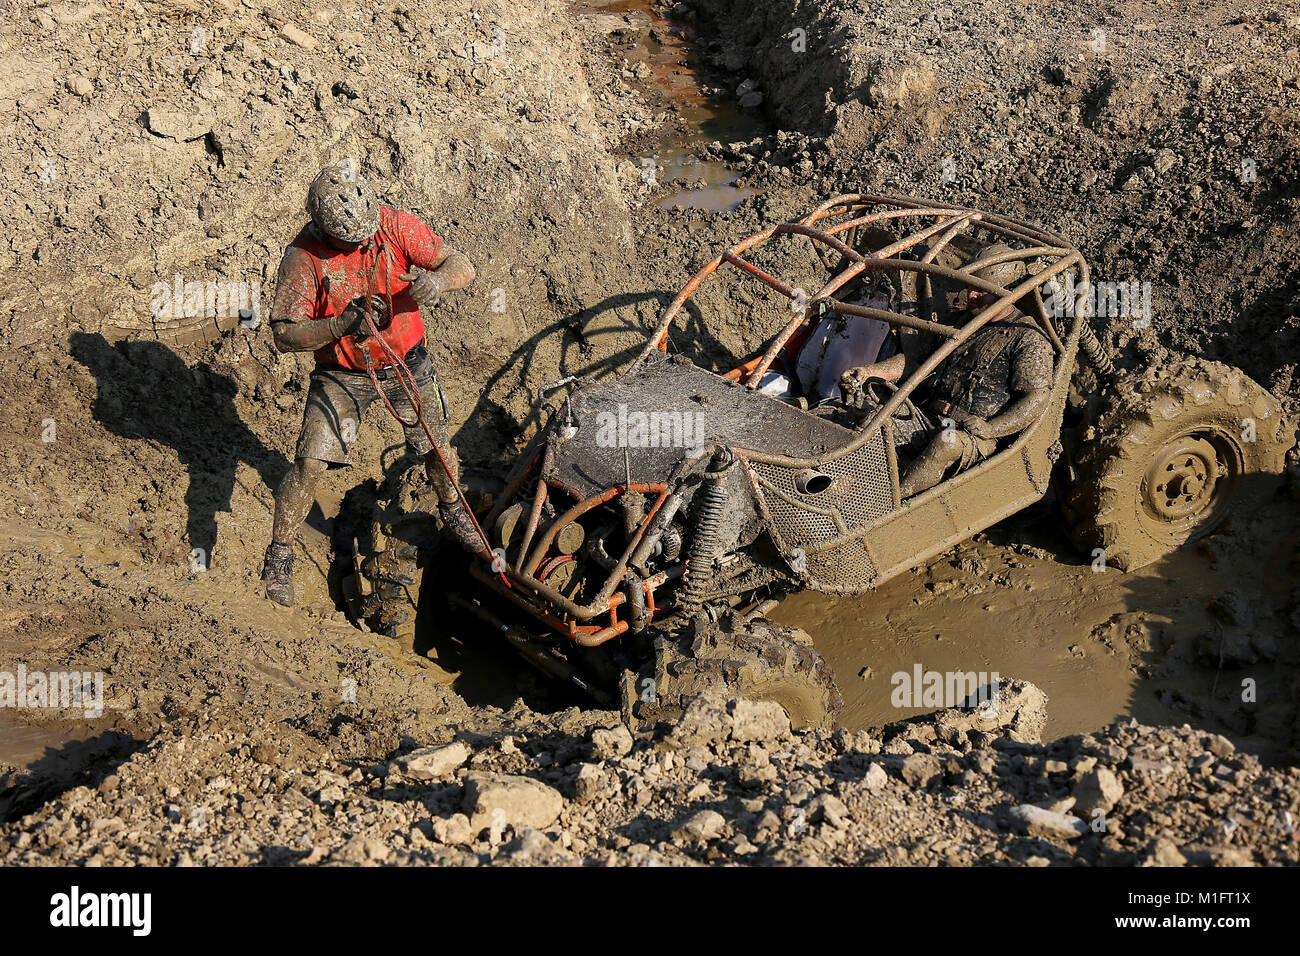 Rence, Slovenia - May 27, 2017: Offroad 4wd race - 4wd vehicle is preparing to scale uphill through mud with car winch. Copilot is pulling the winch. Stock Photo